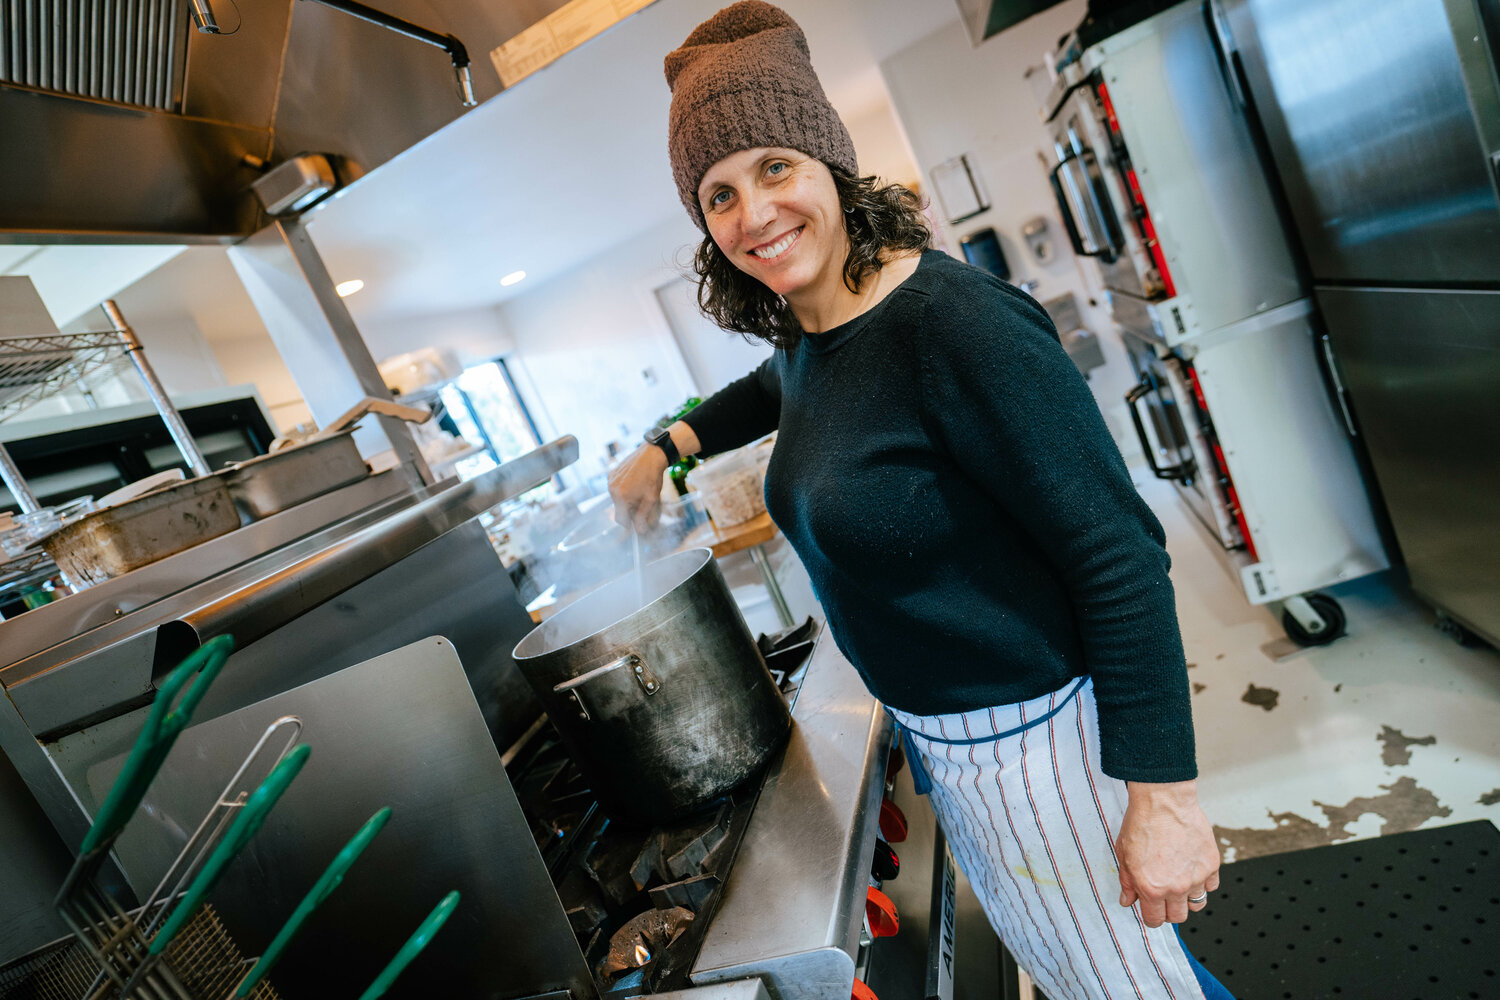 Aimee Dailey-Fallat cooks from dawn until dark every Monday at Lila’s Kithchen in Port Townsend, pareparing dishes for her Planted customers. Photo by Greta Schmidt